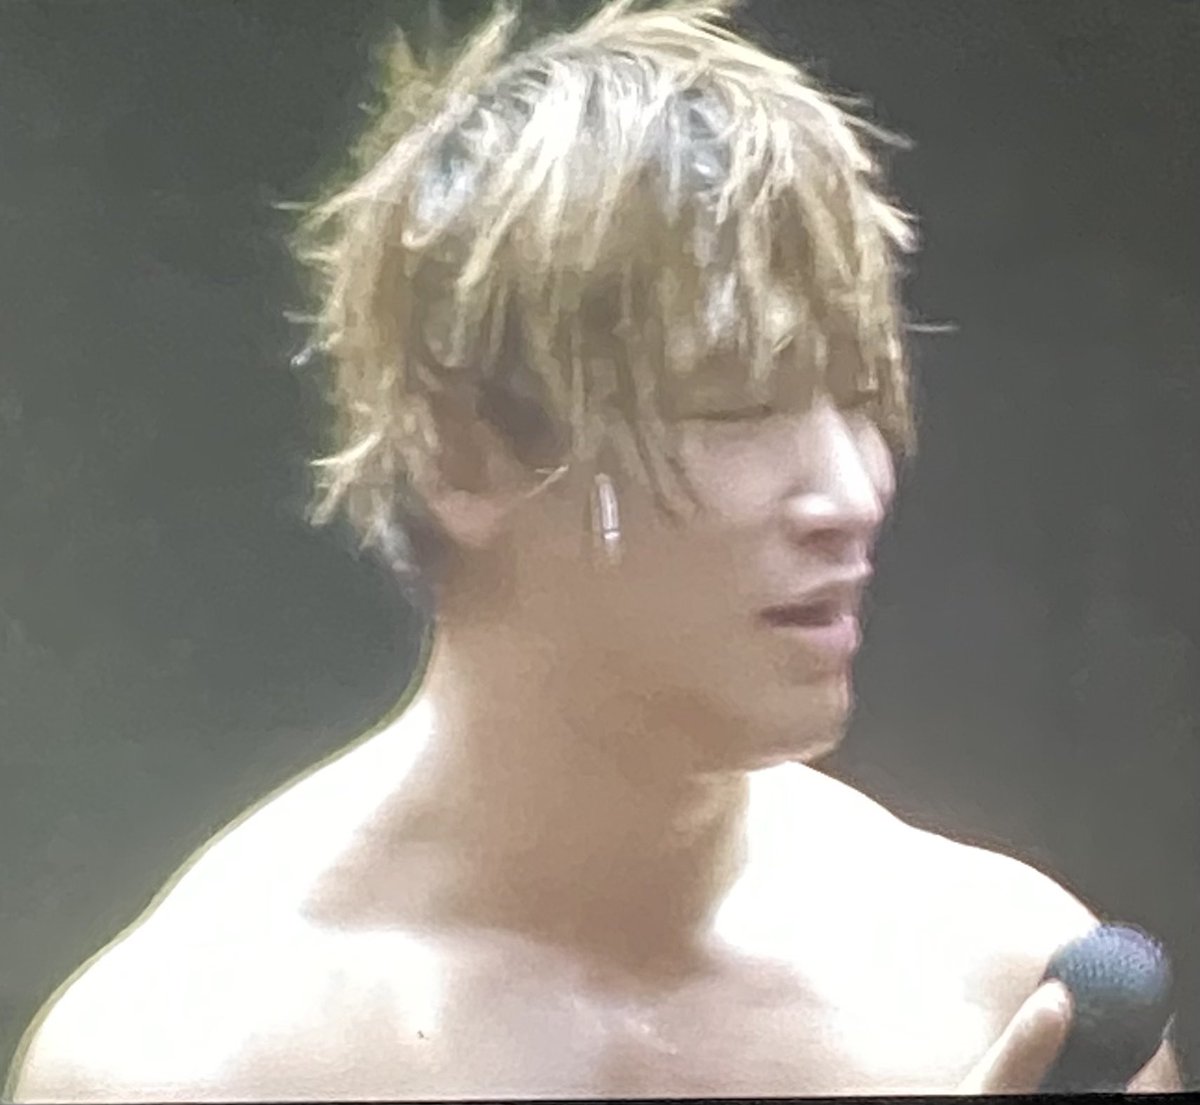 I hate when people insult ibushi-san body. He is such an incredible & beautiful person. He is so kind & cares so much about his fans.
He has worked so incredibly hard since he got hurt but constantly has people insulting him for how he looks which is just ridiculous ⭐️💙